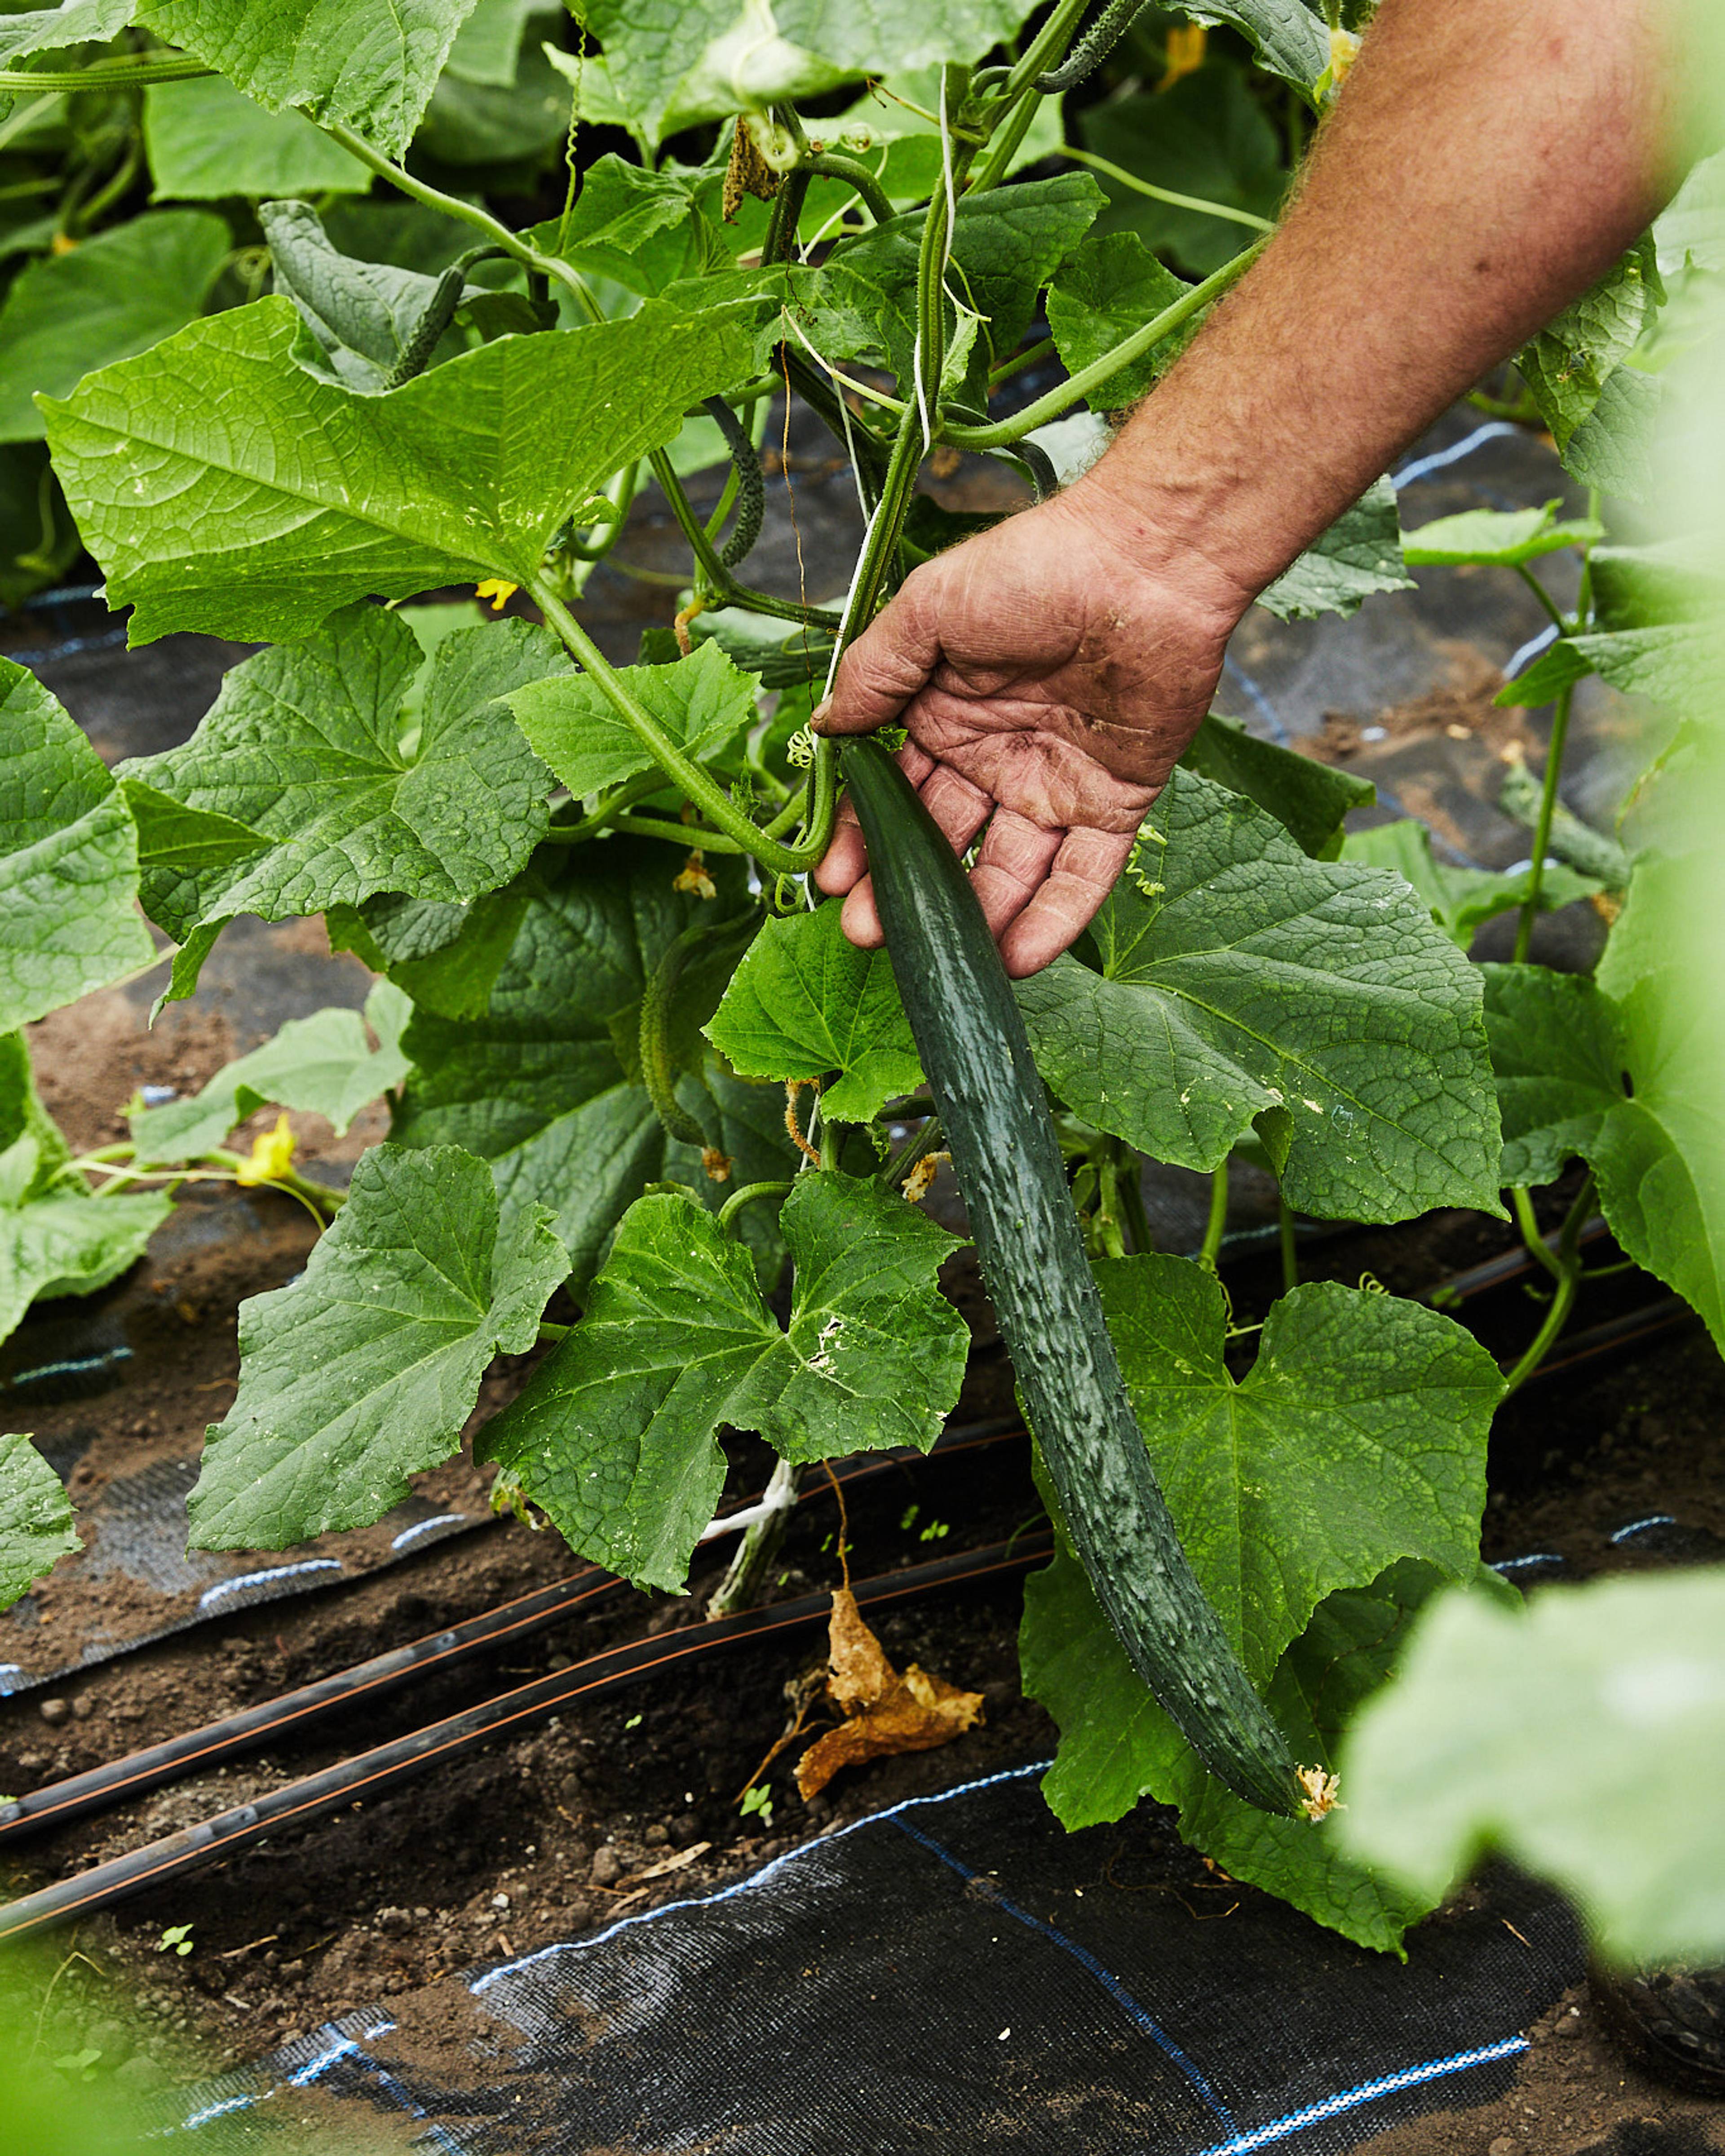 dragon cucumber growing on the plant